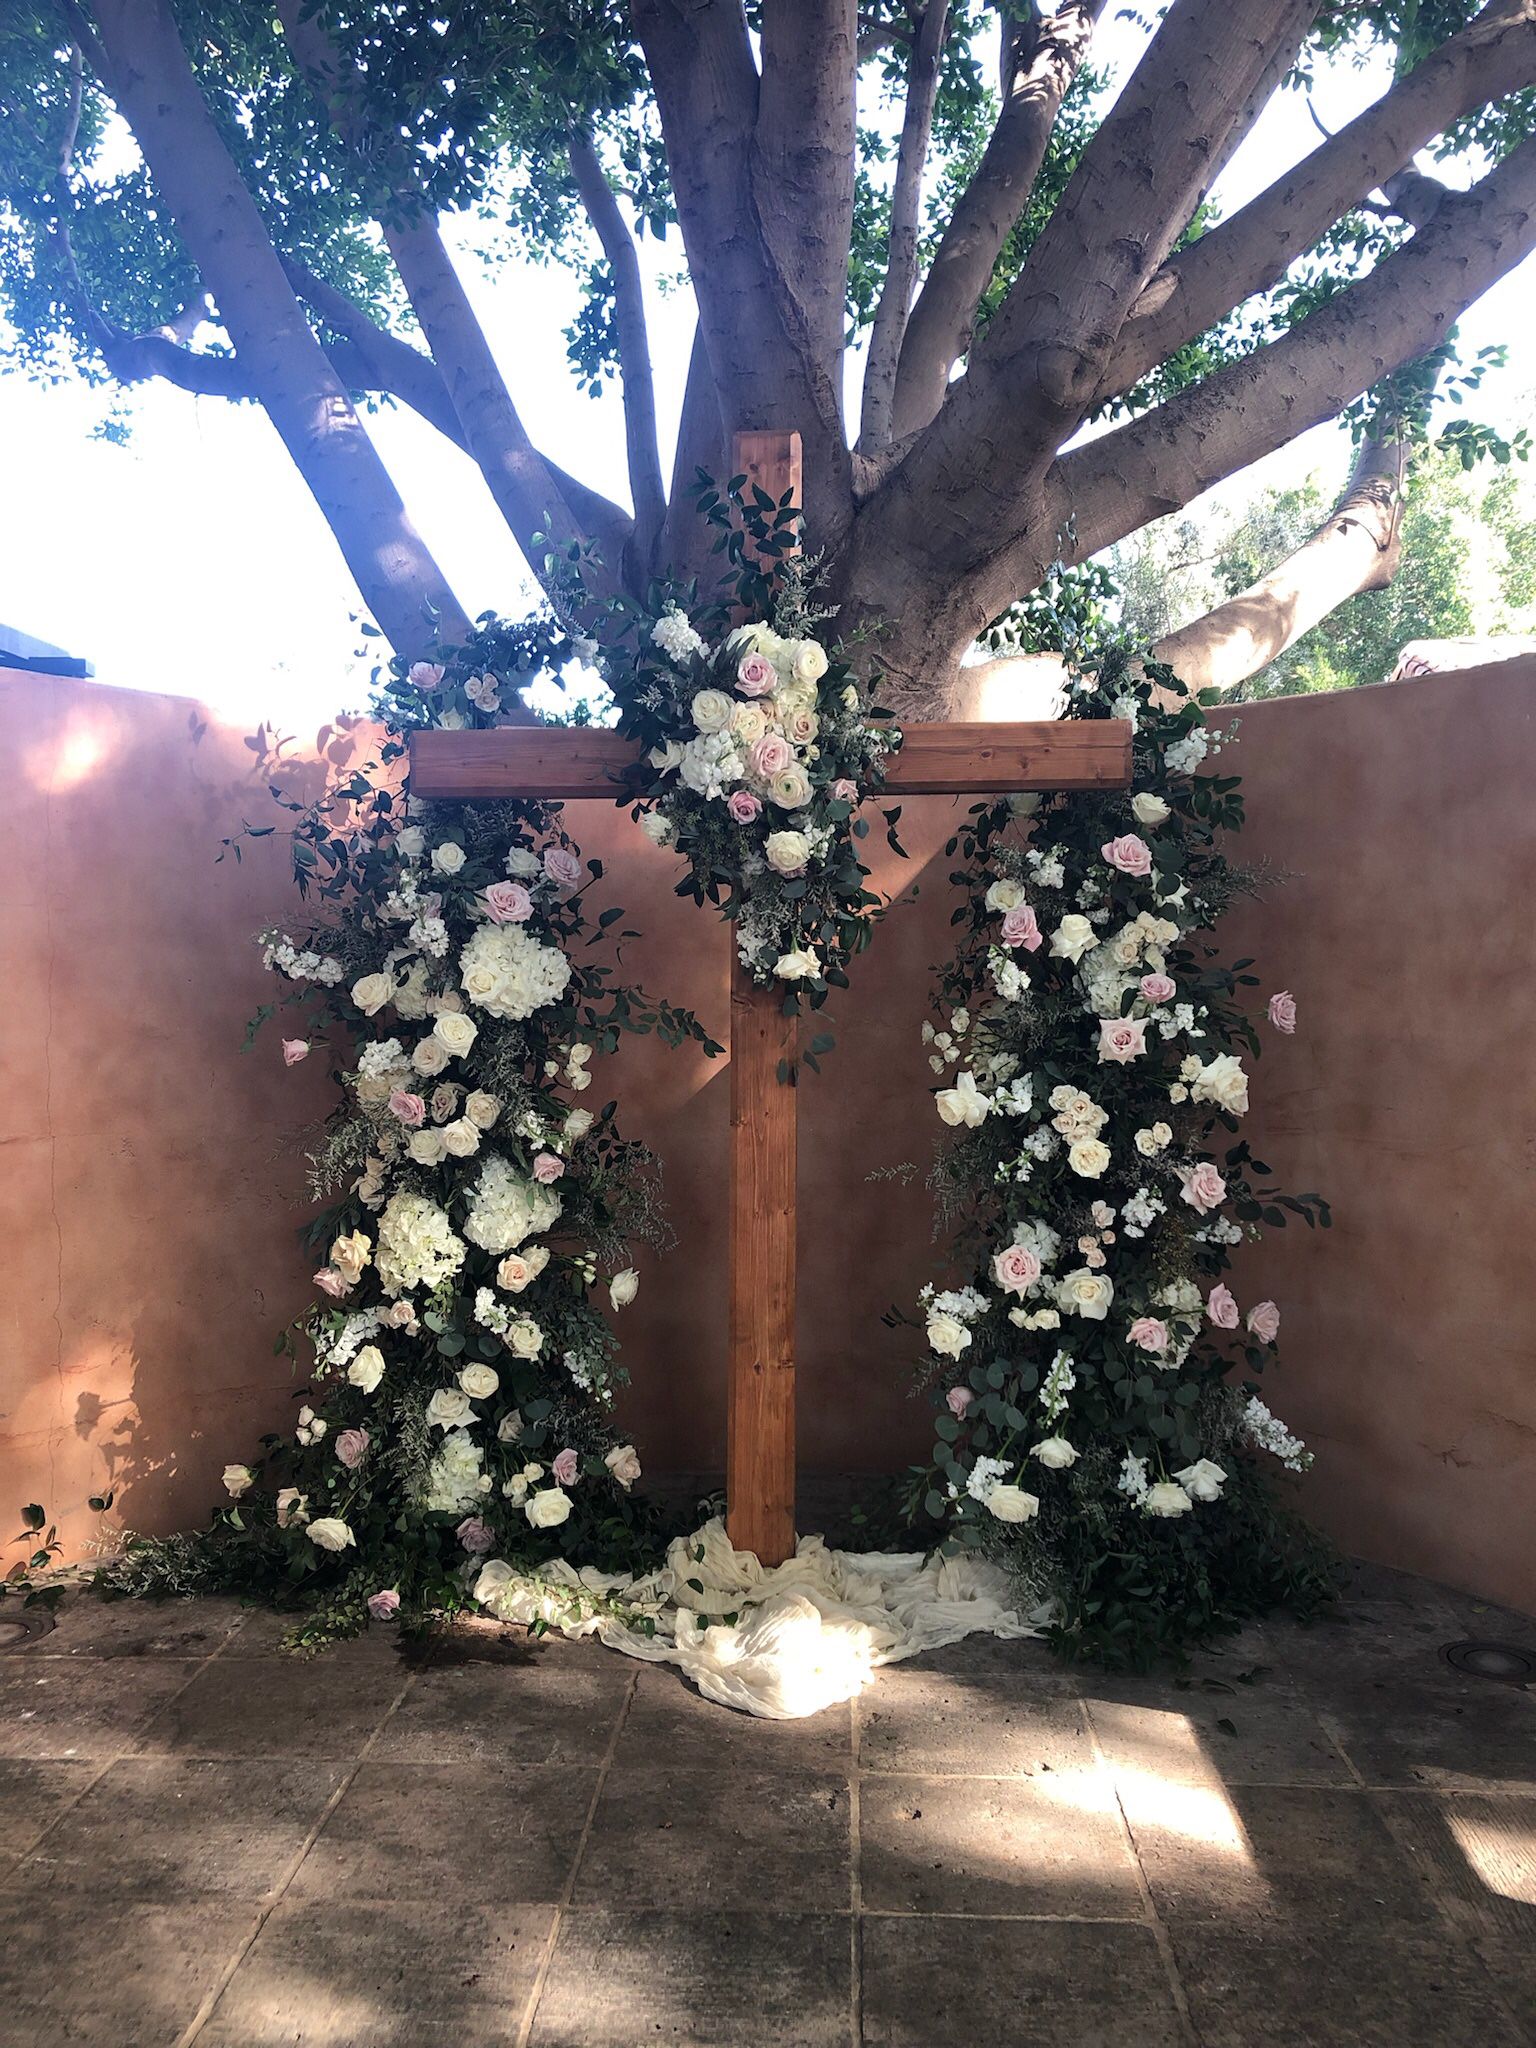 Large Wooden Cross Used Once For Wedding